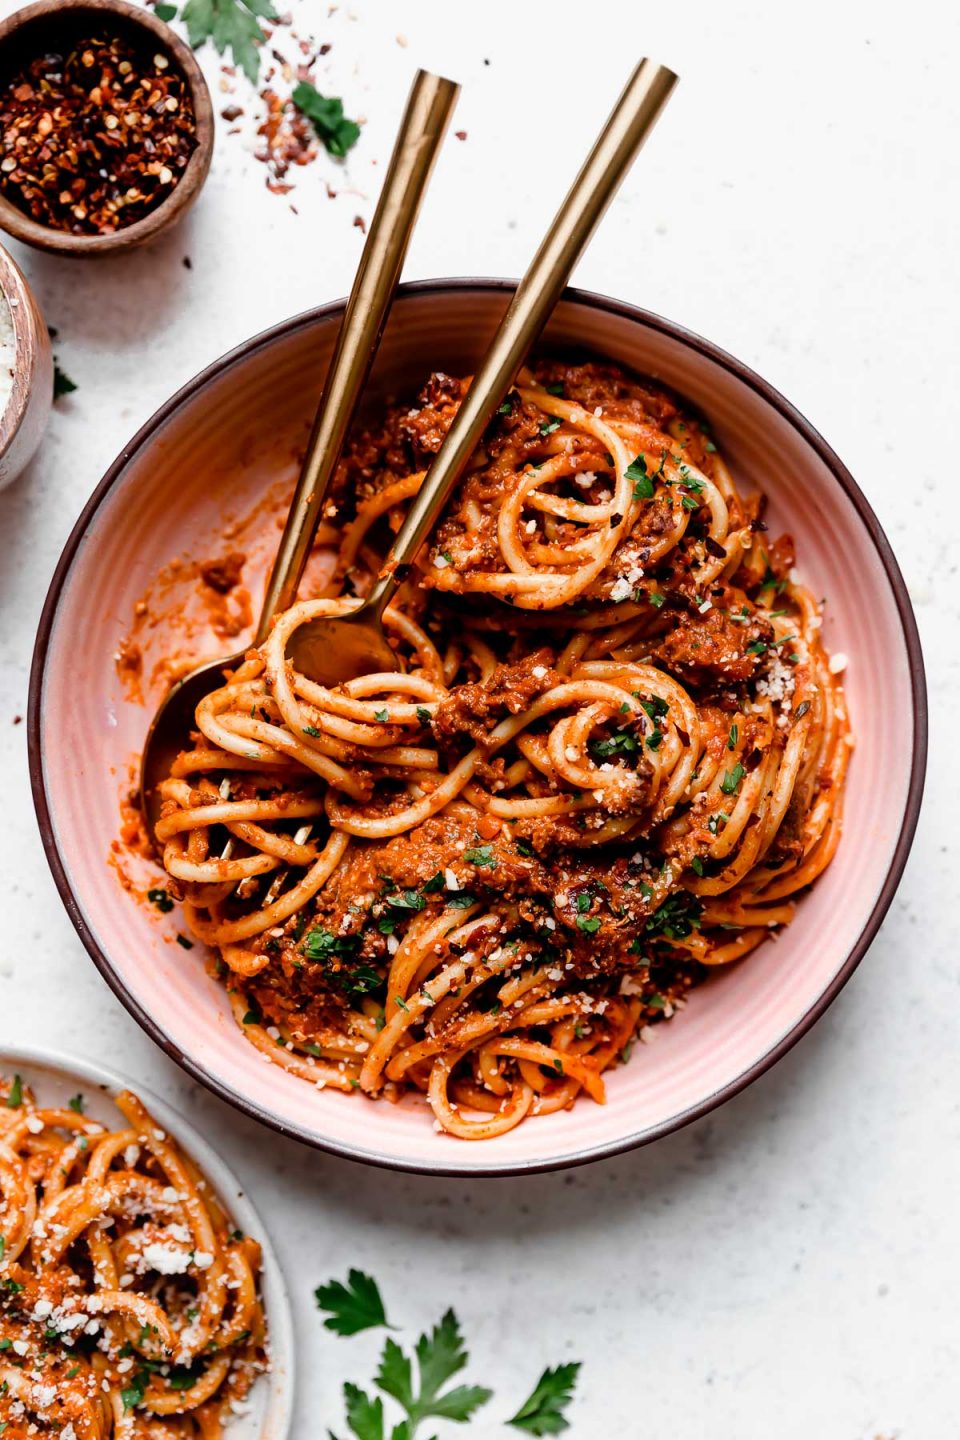 Bolognese sauce tossed into bucatini noodles, served in a pink pasta bowl with gold flatware. The pasta bolognese is topped with grated cheese, chopped parsley, & crushed red pepper flakes.